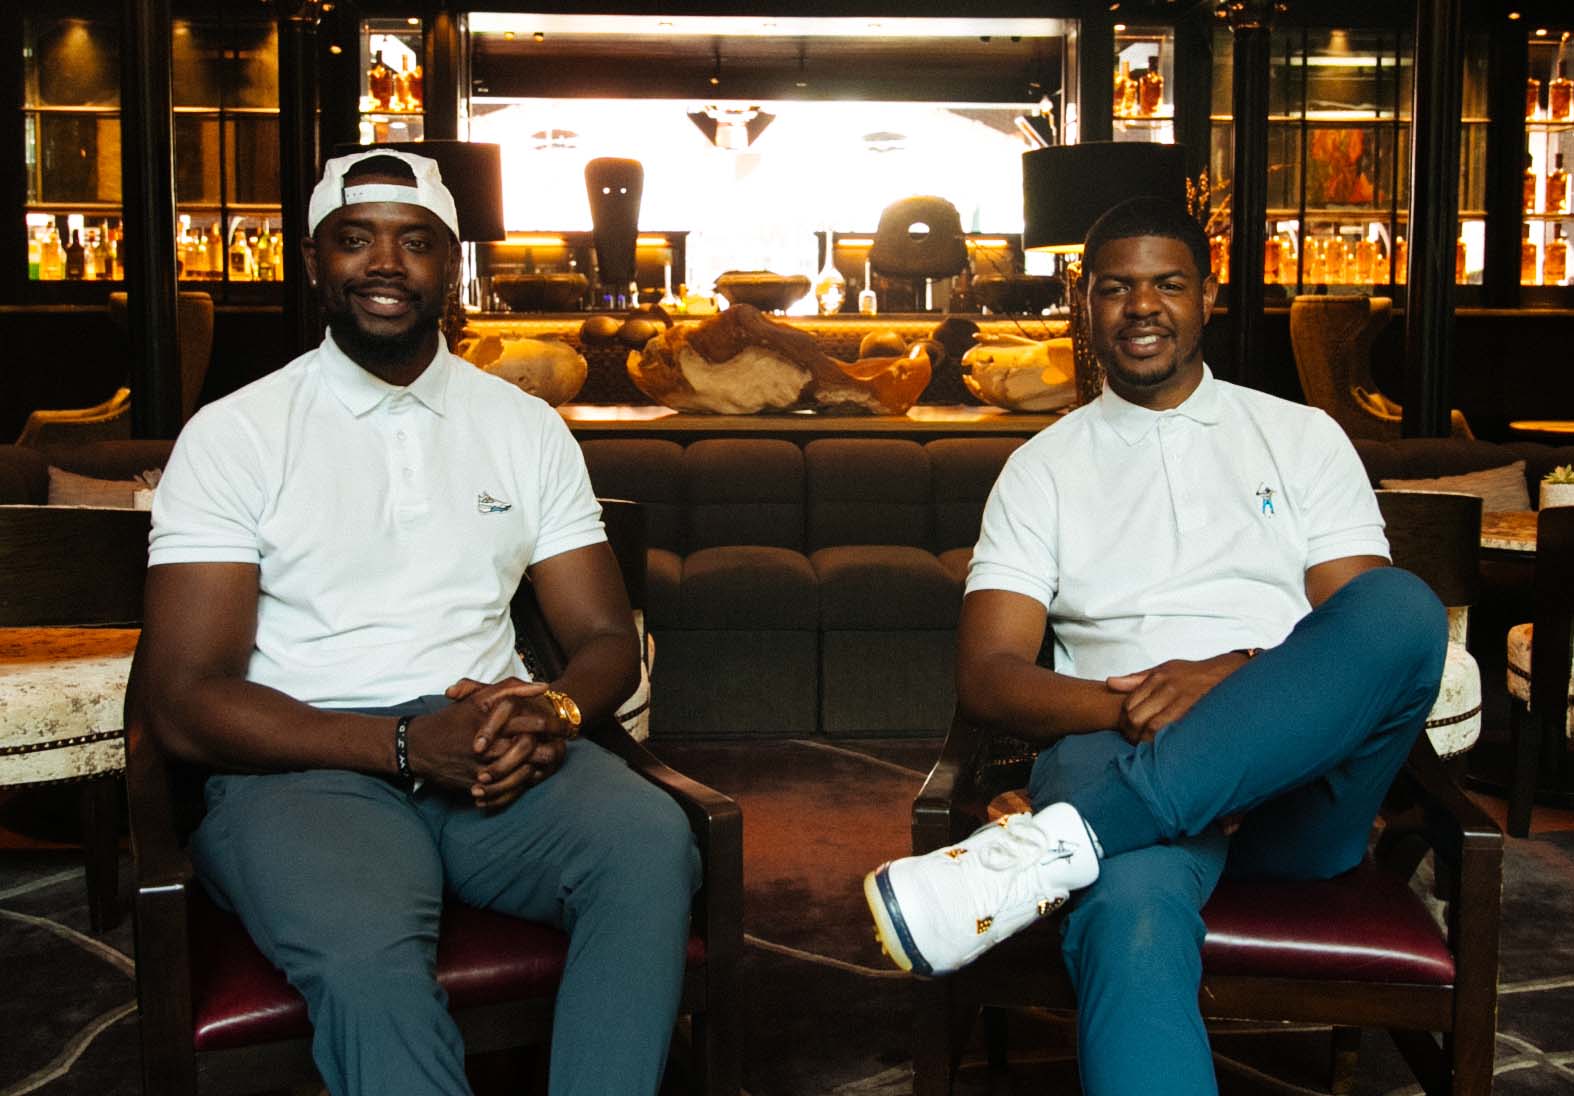 Eastside Golf And Jordan Brand Are Teaming Up For First Golf